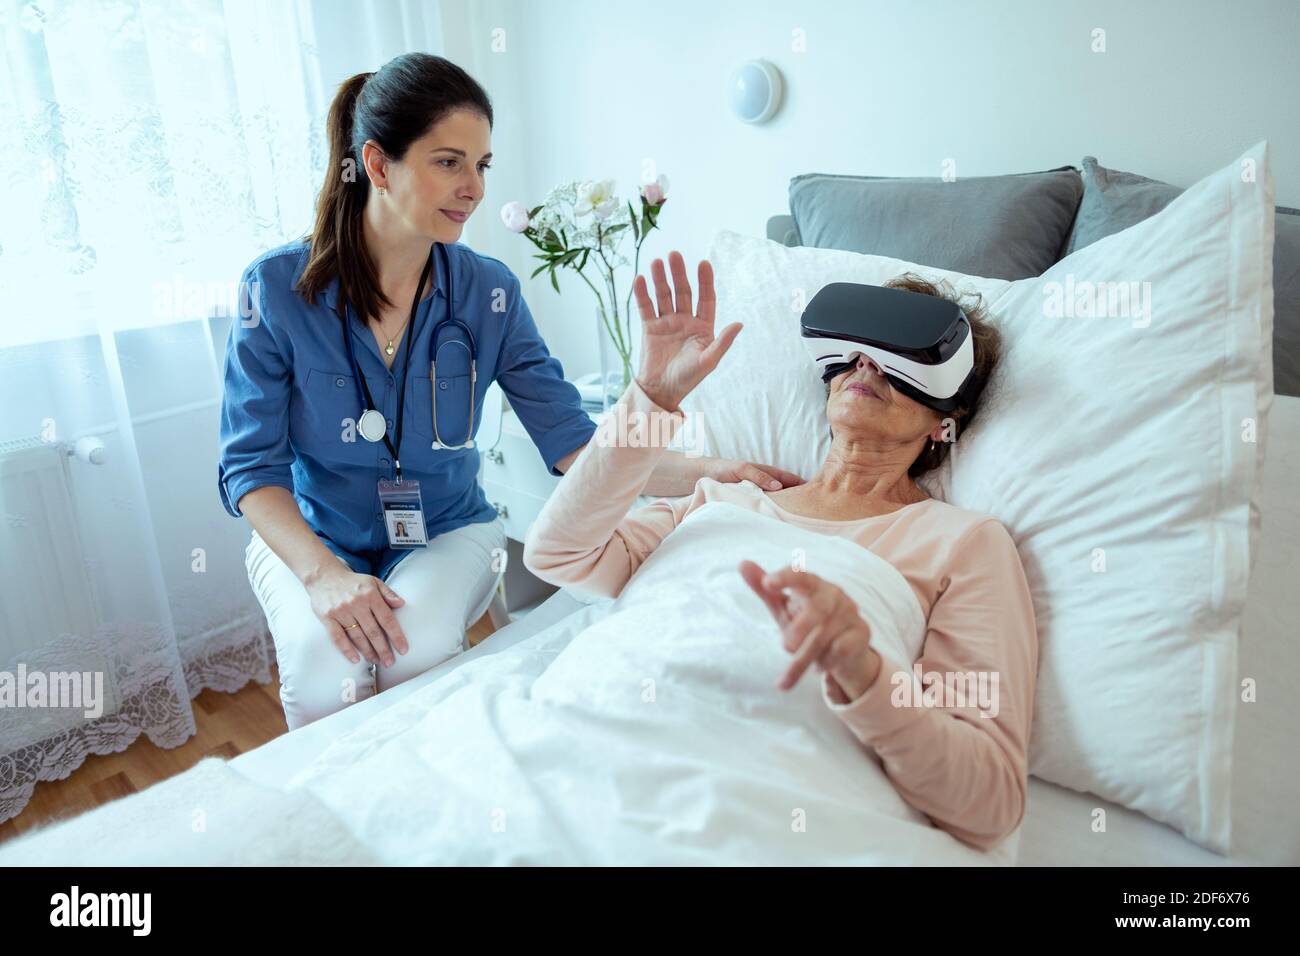 Female Doctor Checking on Elderly Patient Lying in Hospital Bed Doing Therapy Via VR Technology. Friendly Doctor Helping Senior Woman Receive Therapy. Stock Photo